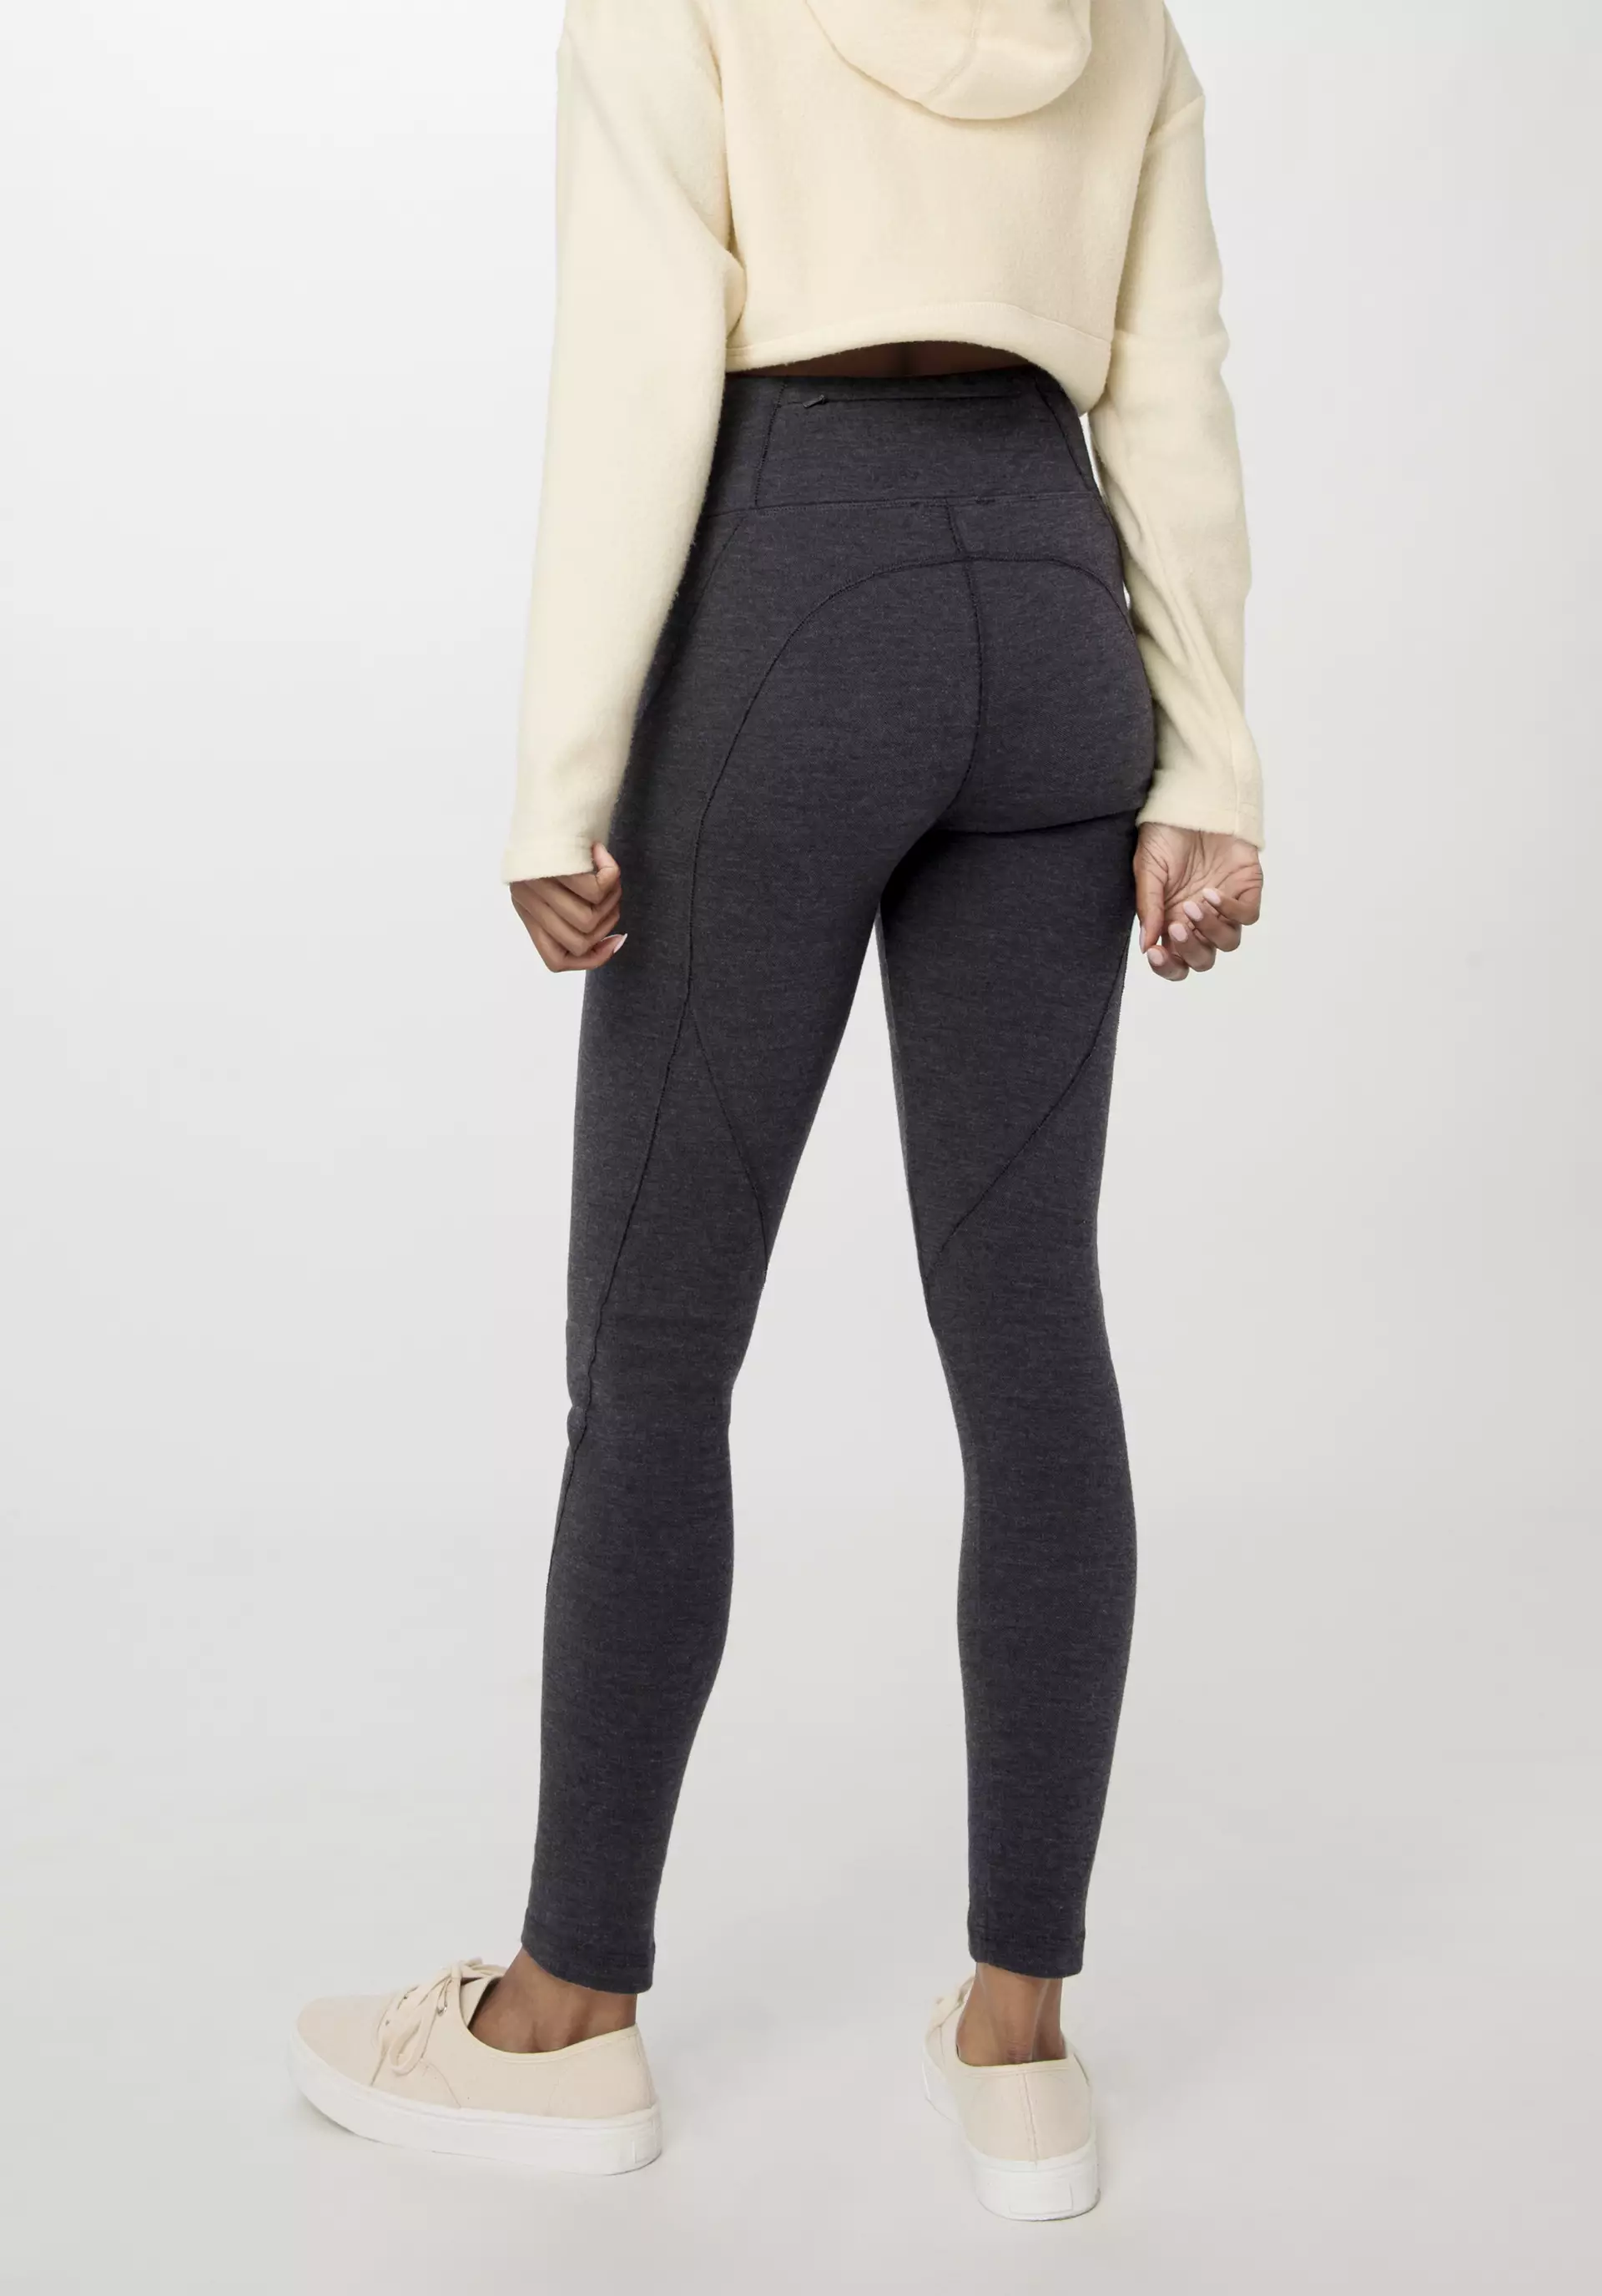 Leggings Fitted Medium Cut ACTIVE FUNCTIONAL made of organic merino wool with organic cotton - 2